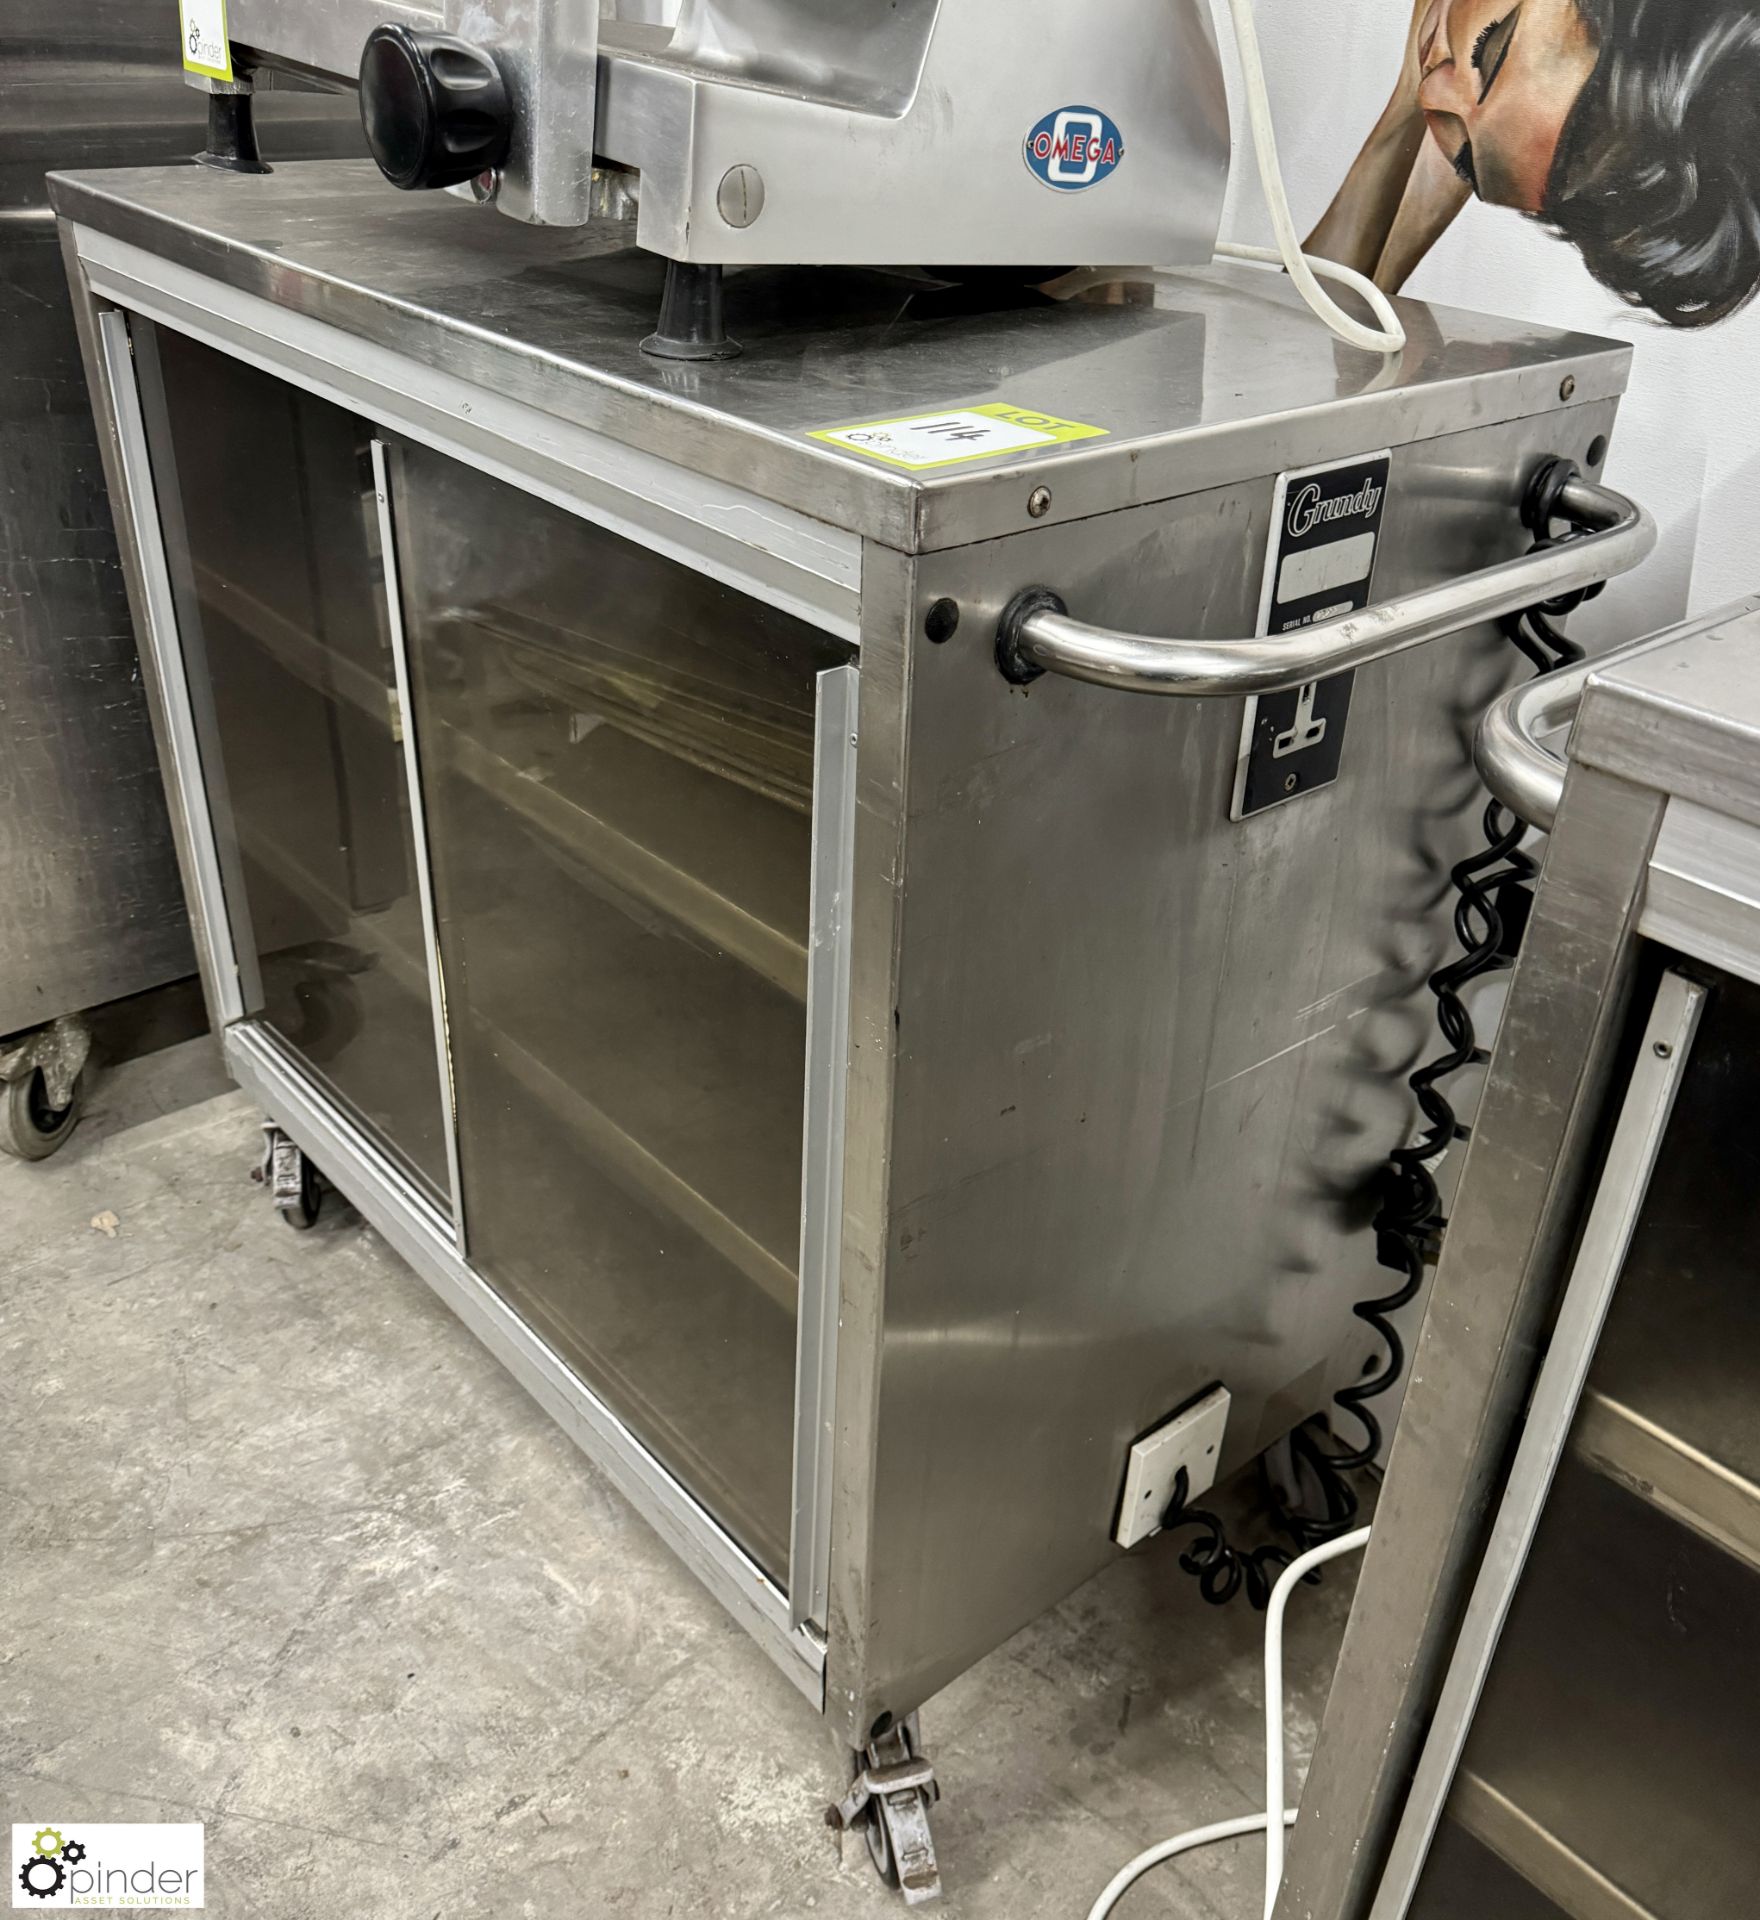 Grundy Maid stainless steel Heated Trolley, 240volts - Image 2 of 4